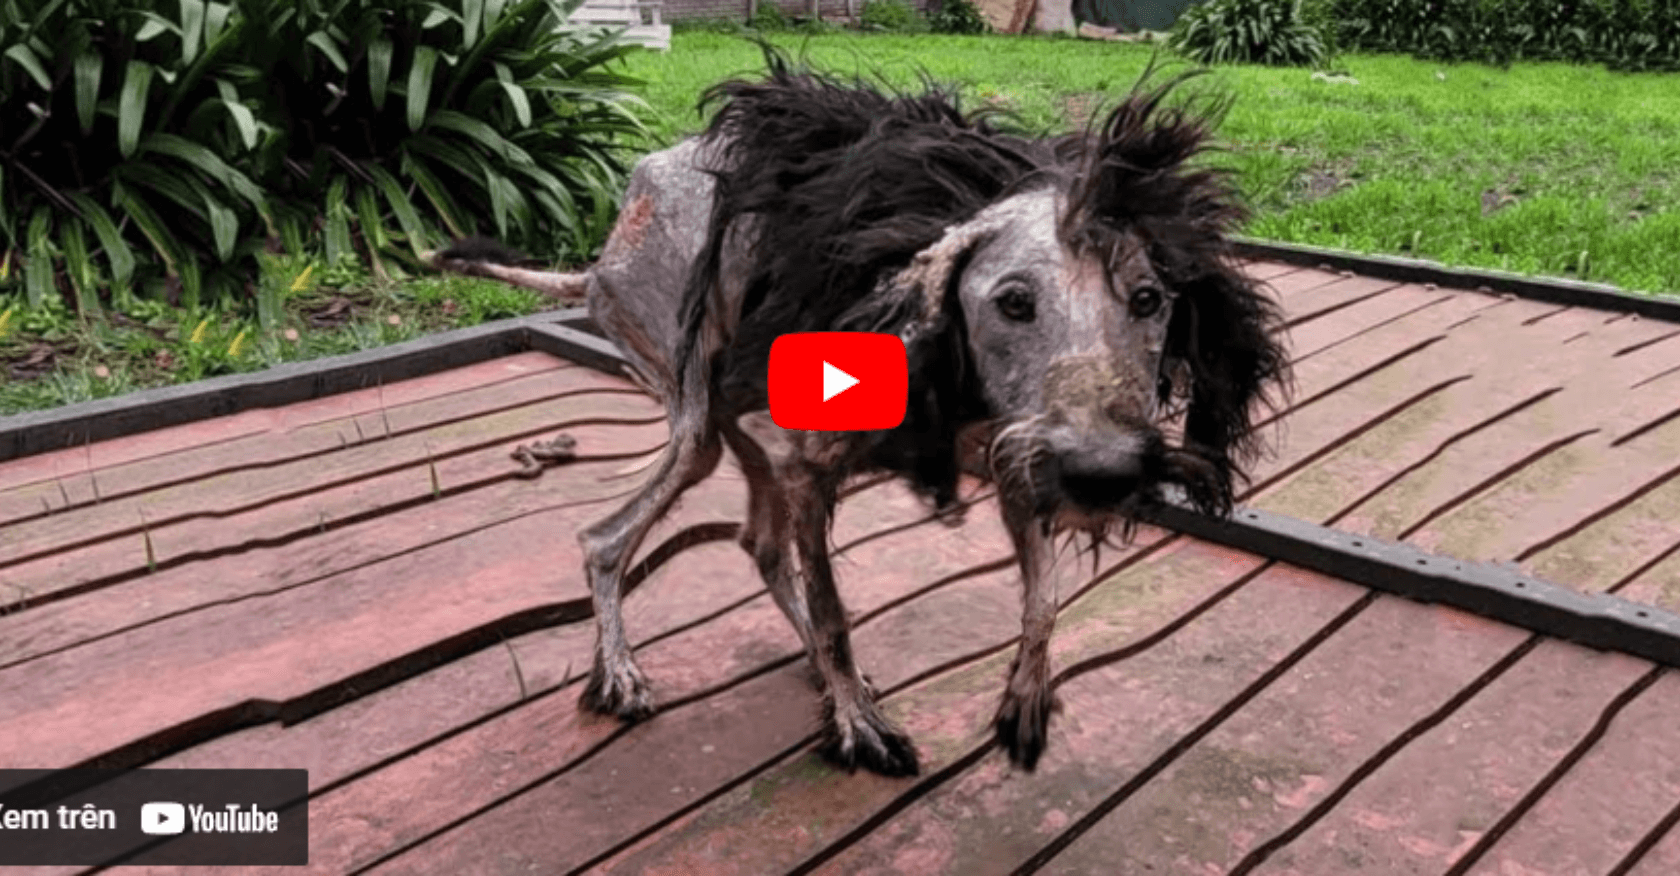 A Tale of Survival: The Journey of an Extreme Malnourished Dog